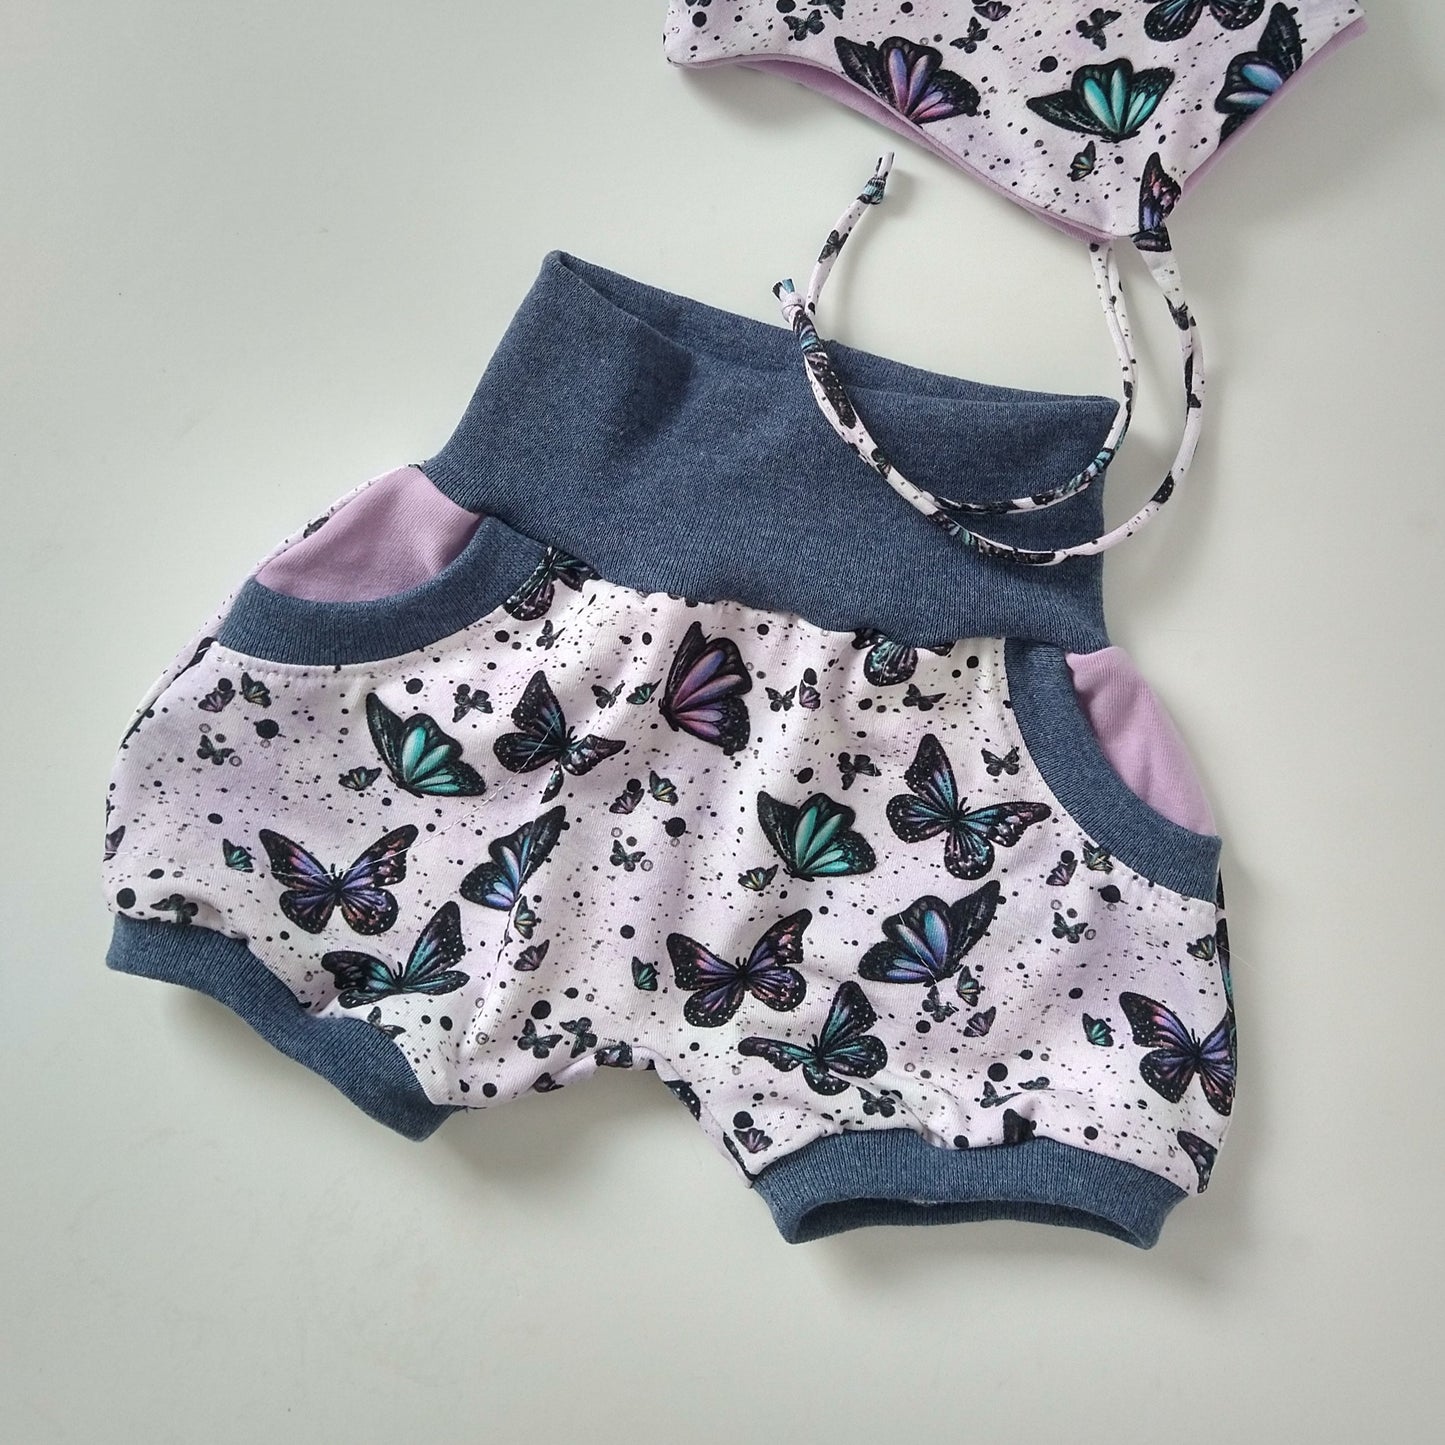 Baby summer shorts, size EUR 62 cm / US 2-4 months, purple butterfly mix and match (Handmade in Canada)